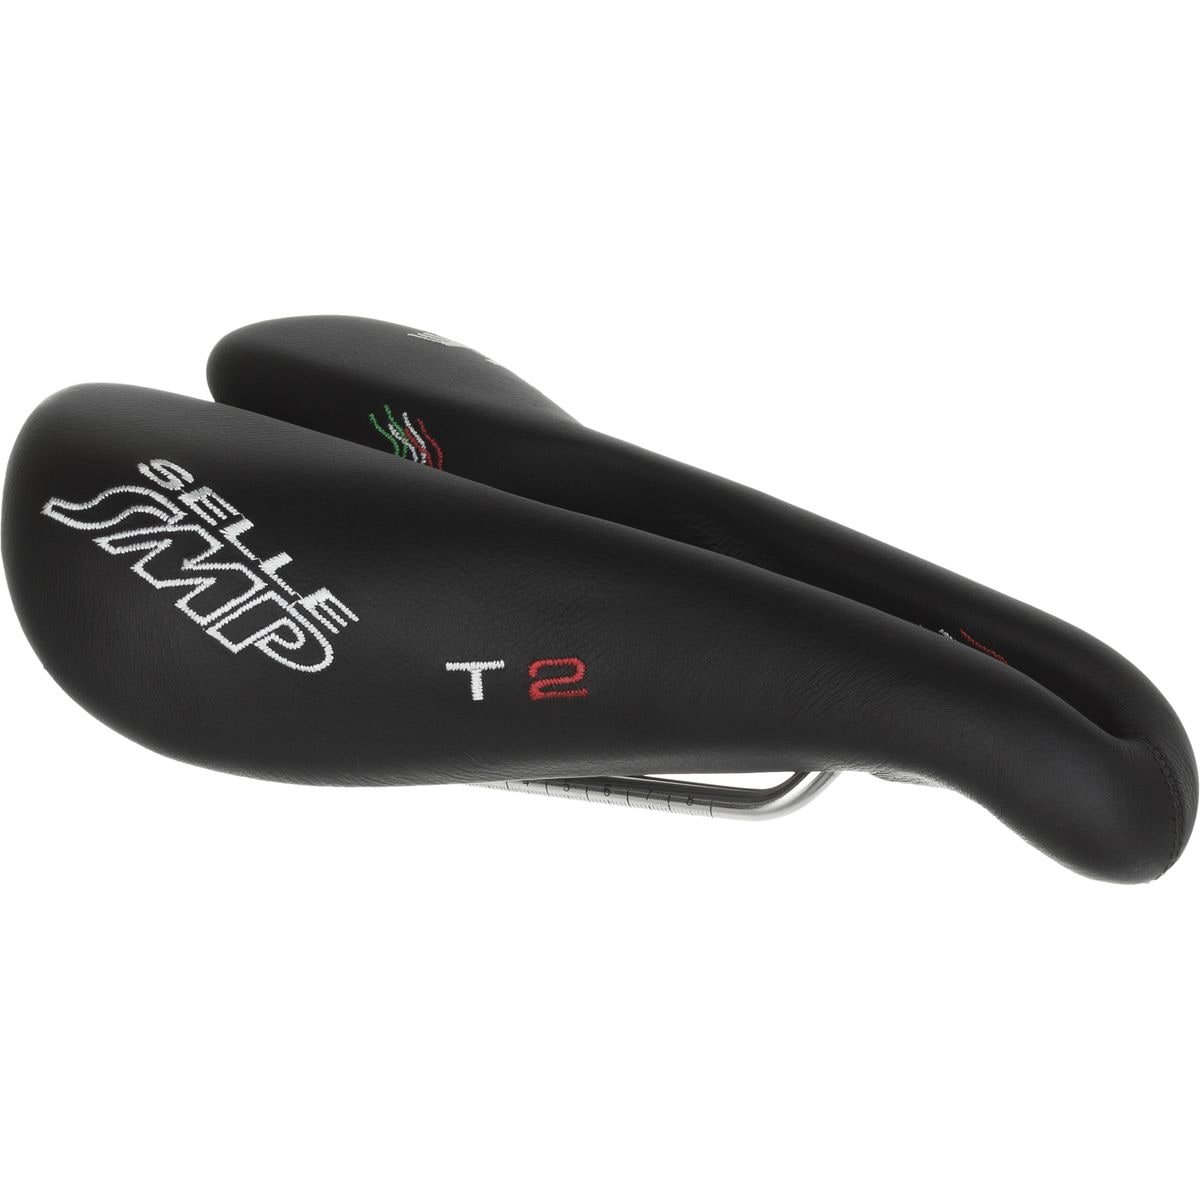 Selle SMP T2 Saddle